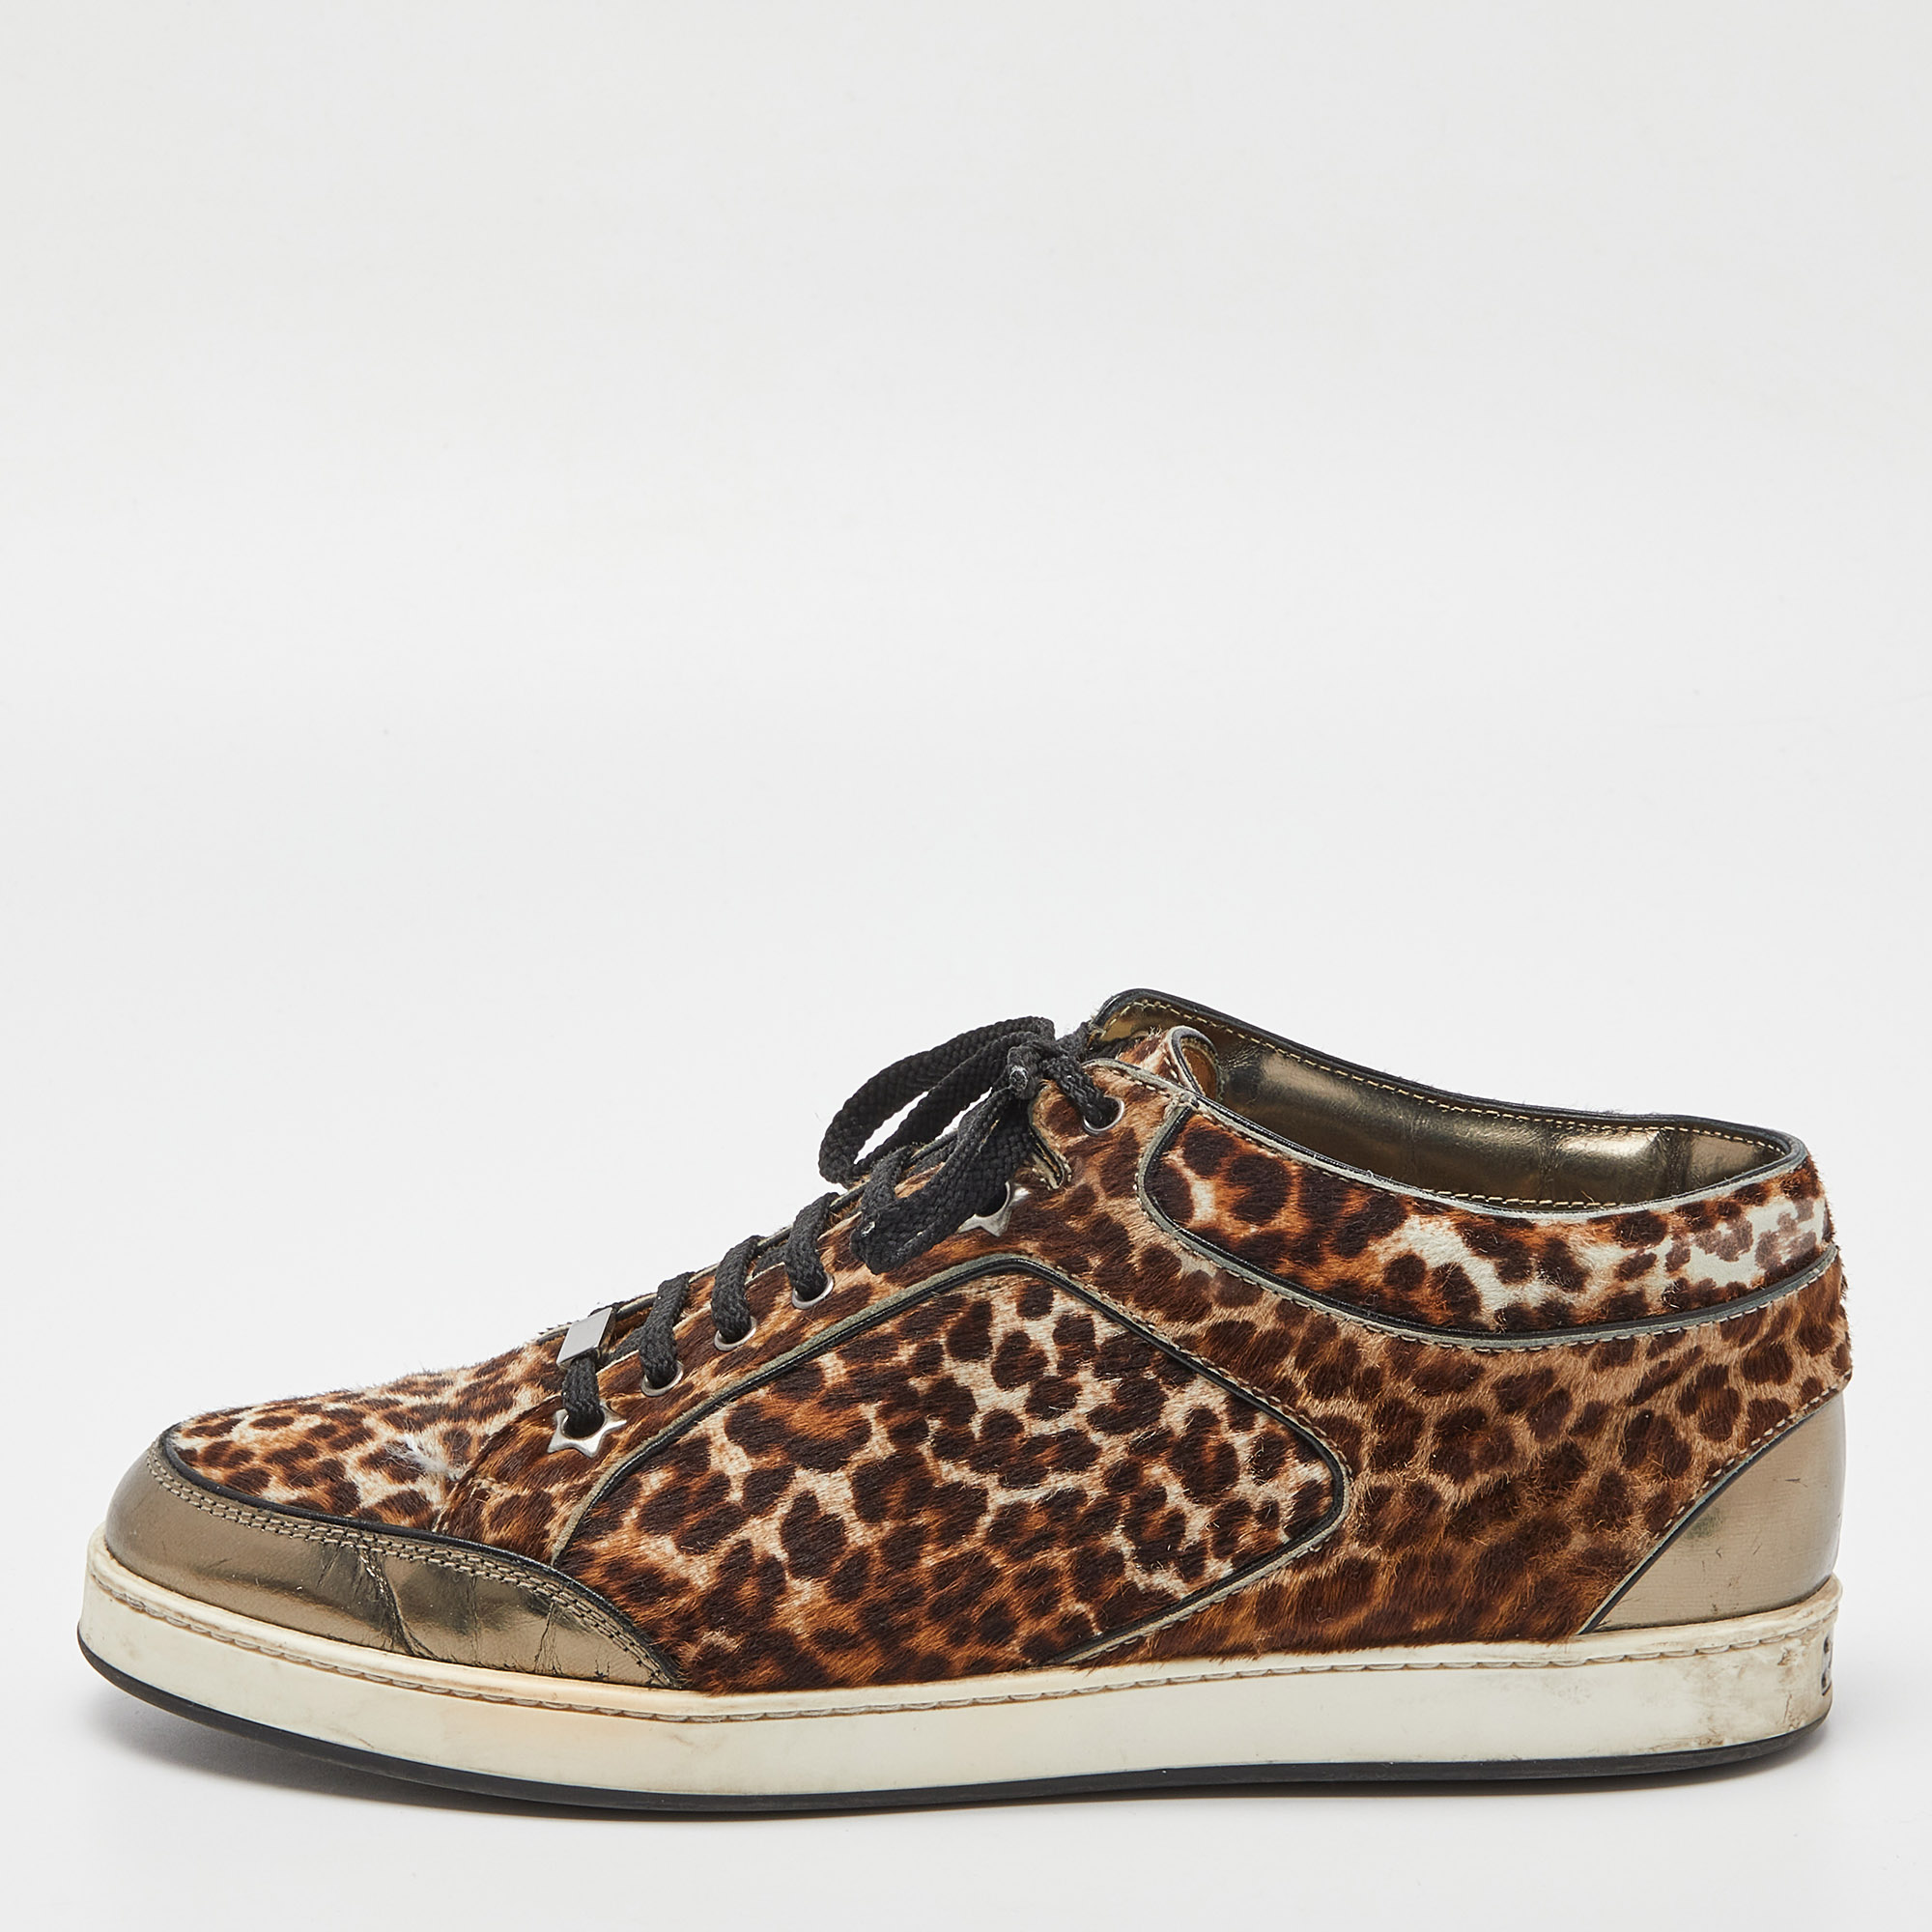 Jimmy choo brown/metallic leopard print calfhair and mirrored leather miami low top sneakers size 38.5